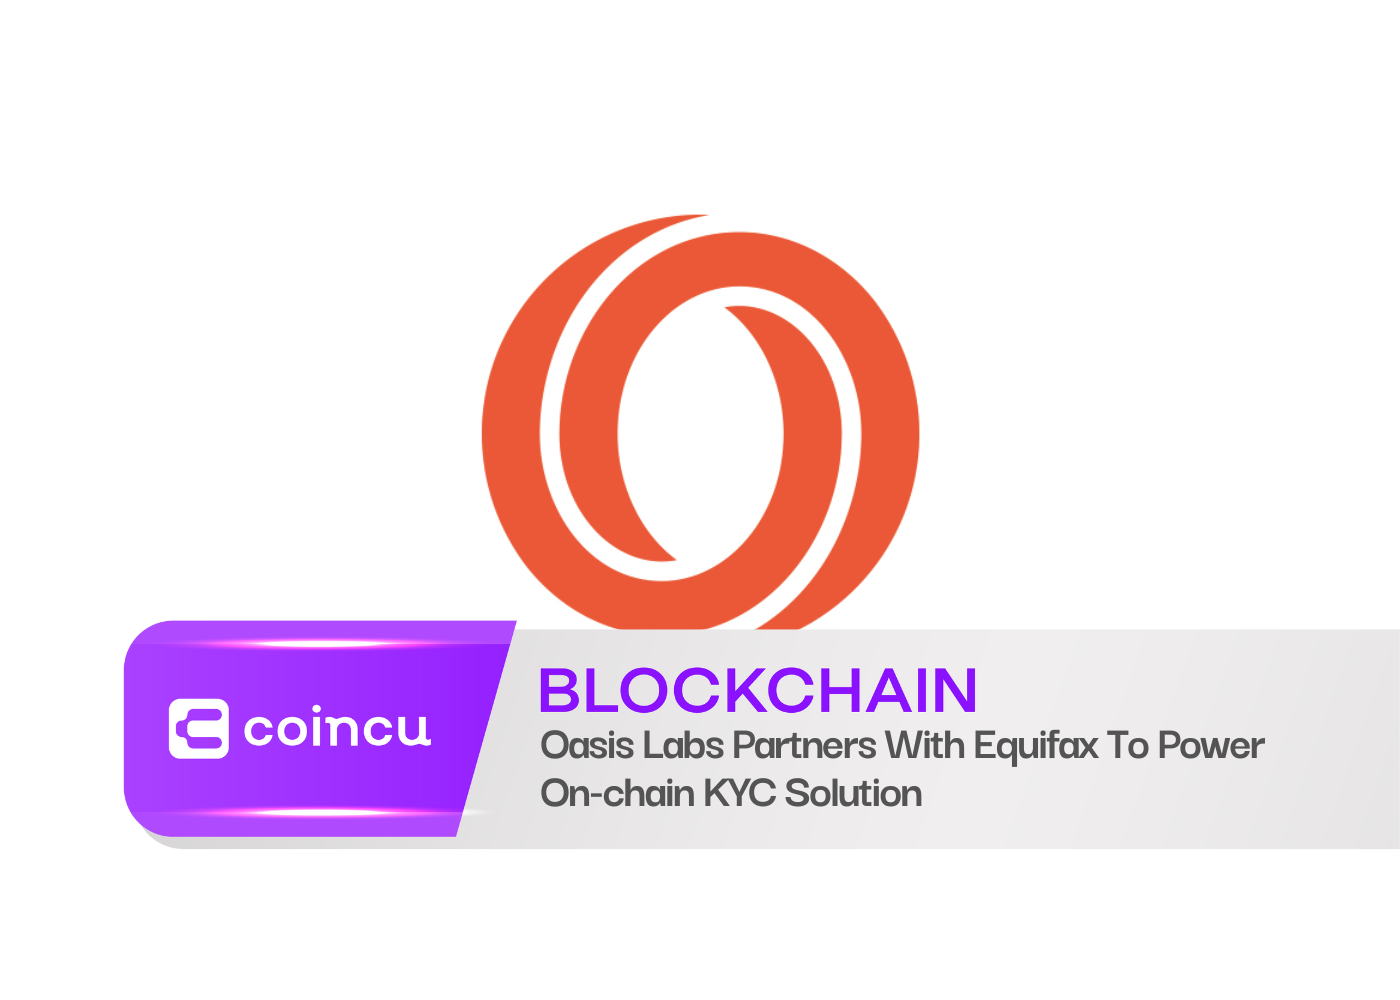 Oasis Labs Partners With Equifax To Power On-chain KYC Solution